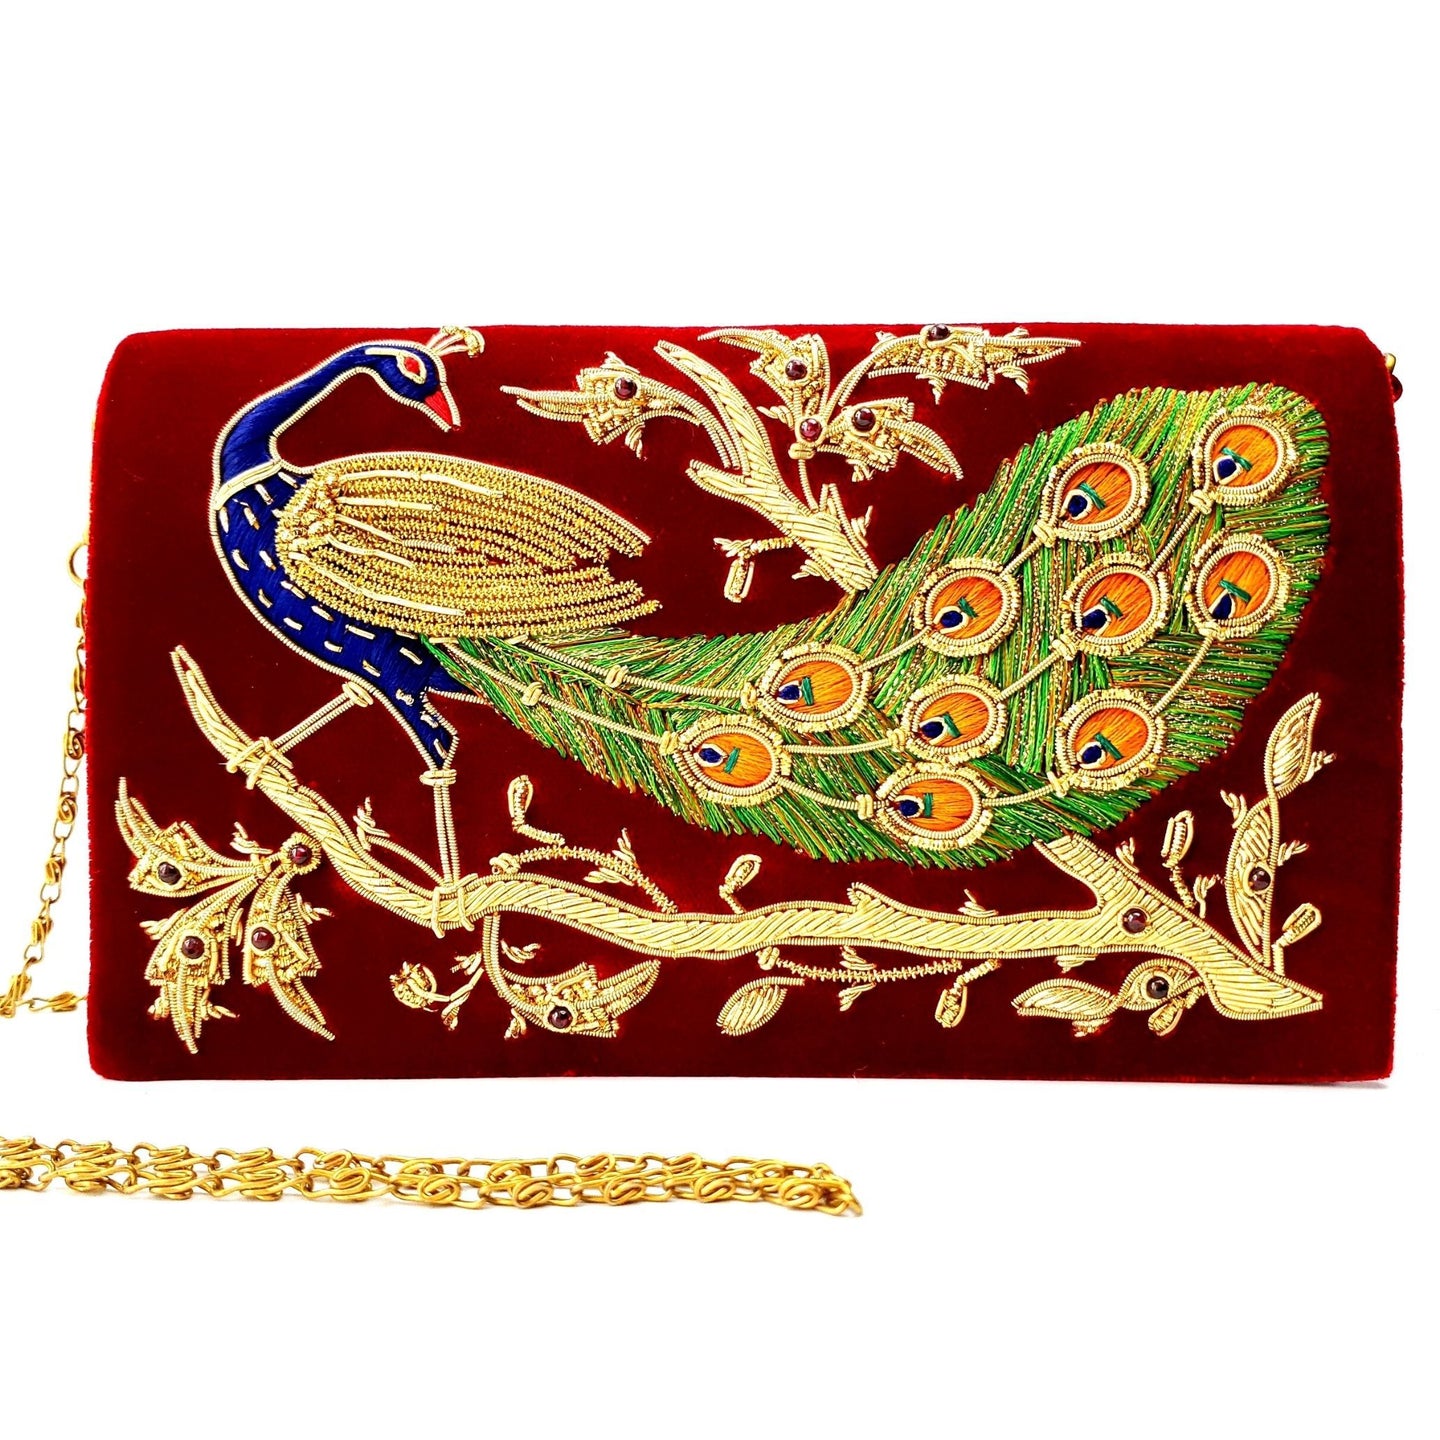 Burgundy red velvet evening bag embroidered with peacock BoutiquebyMariam.